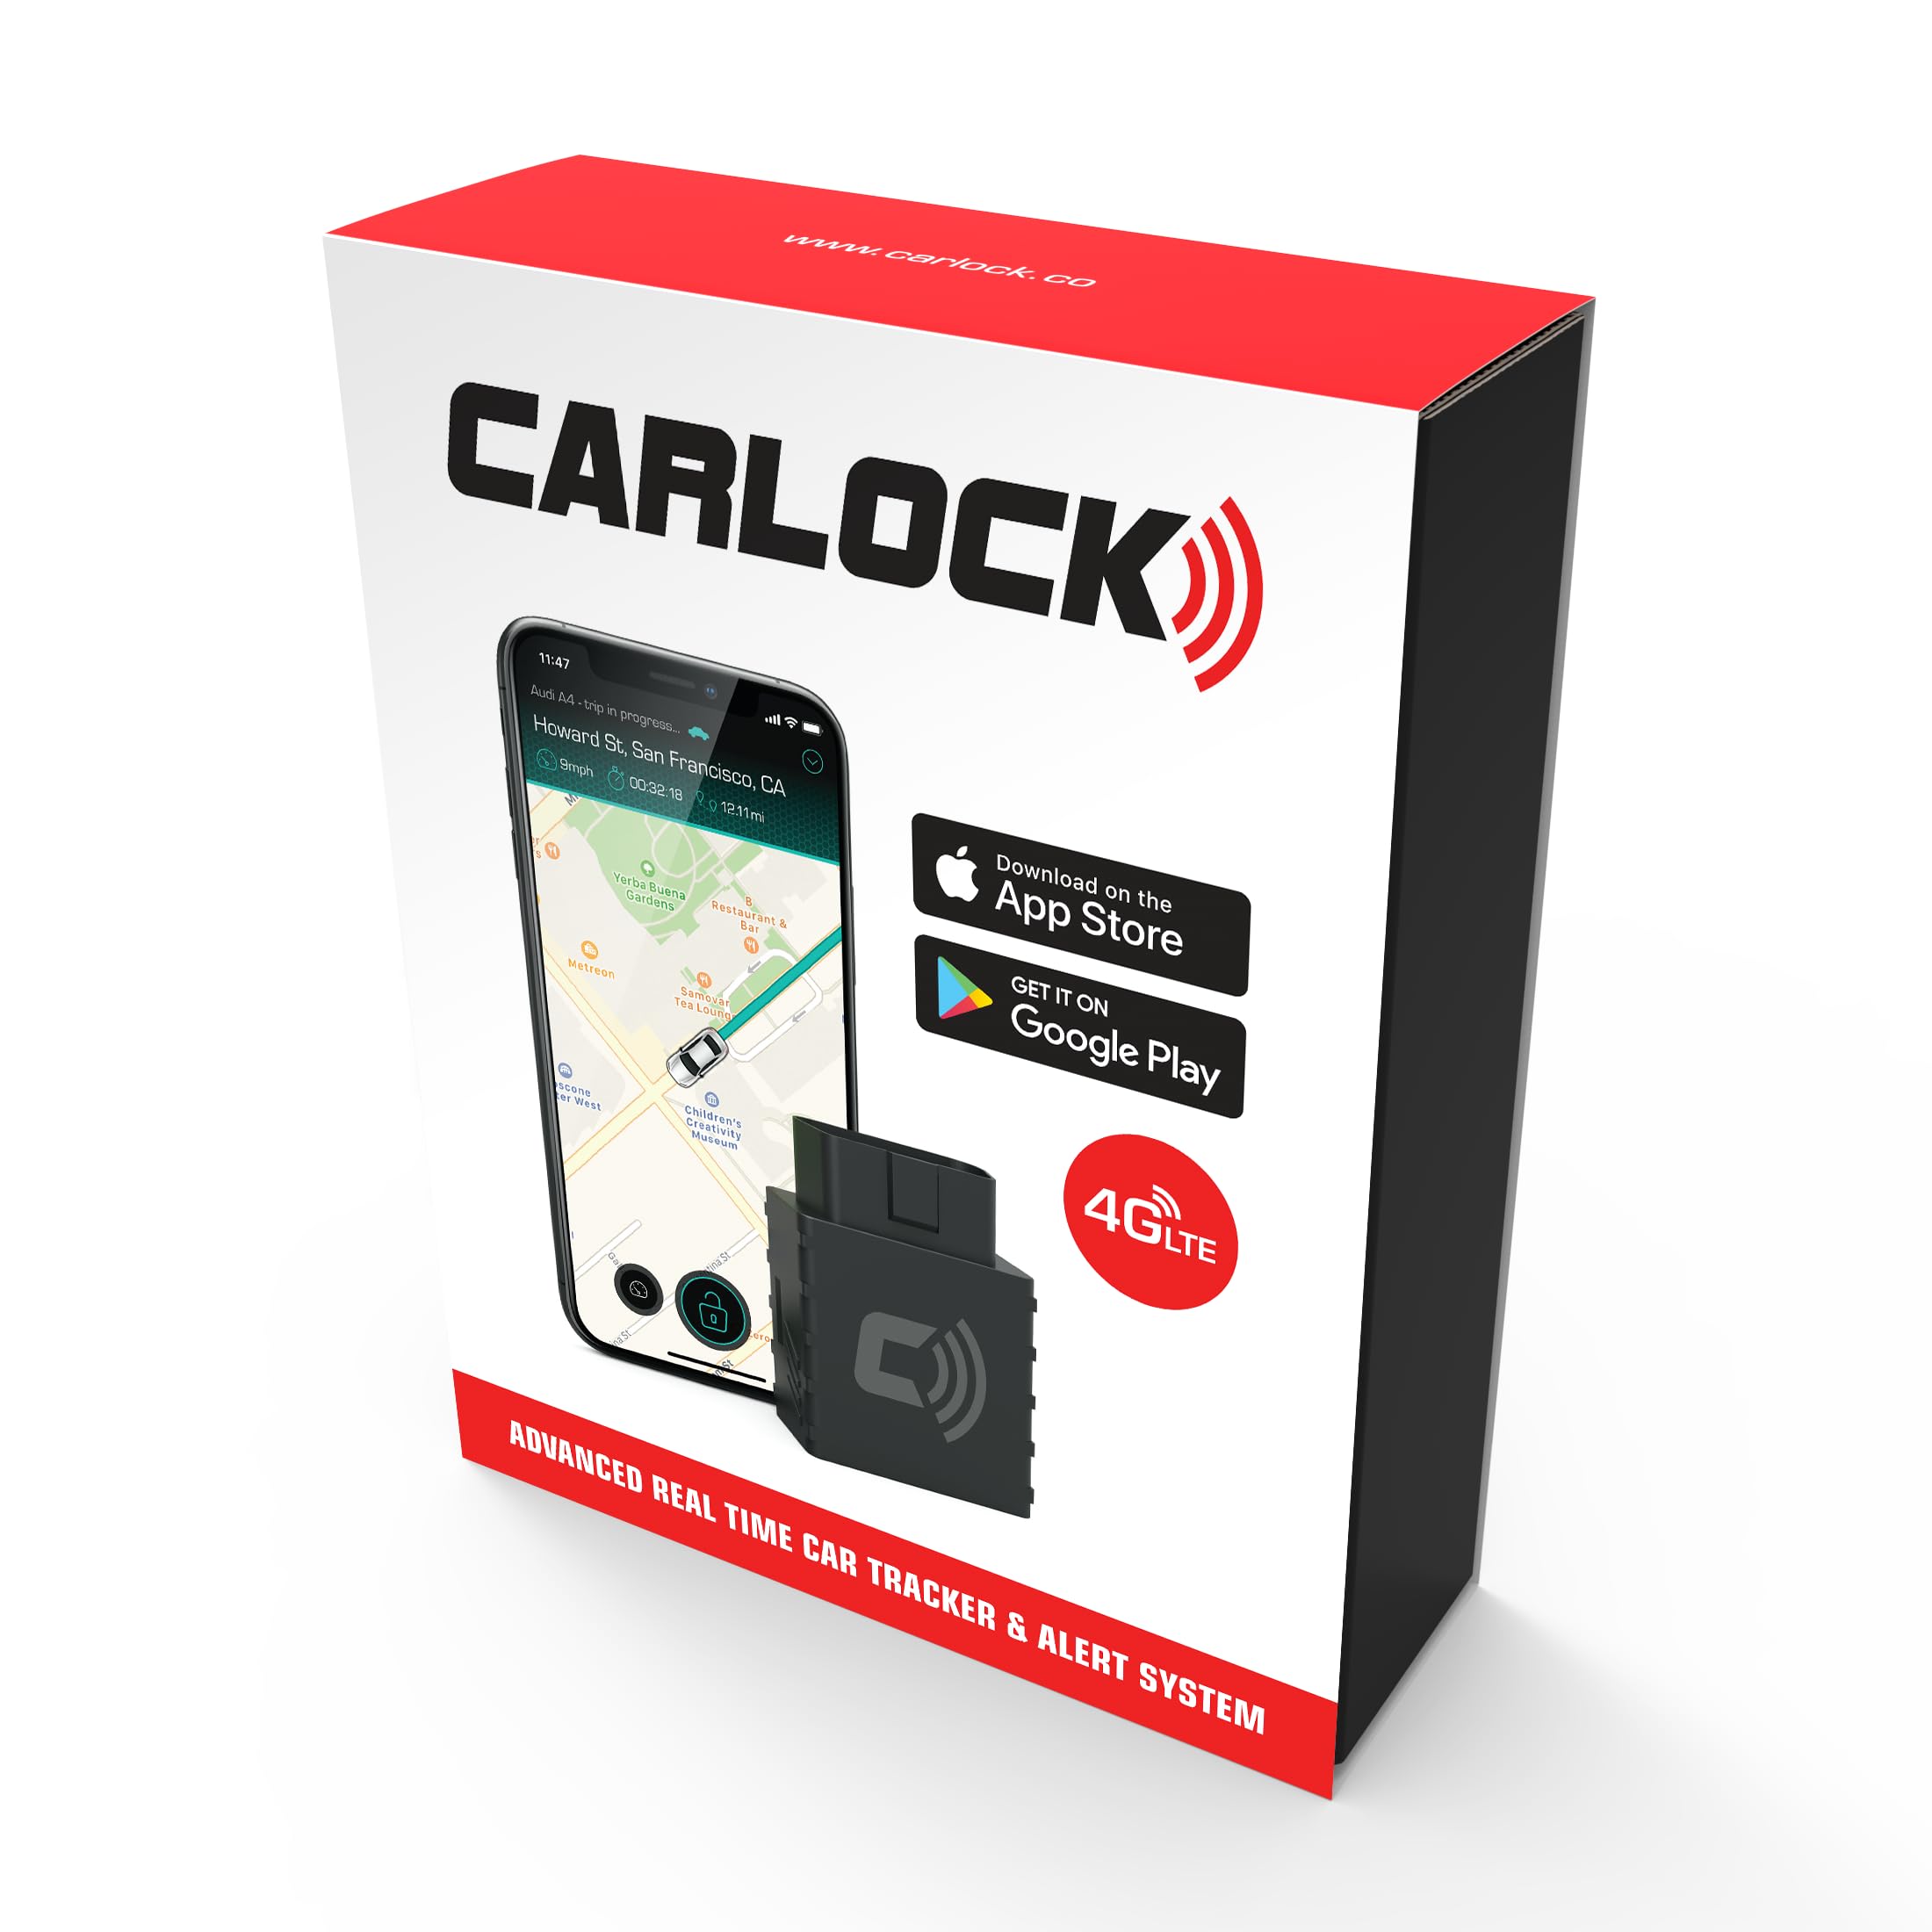 CARLOCK Anti Theft Car Device - Real Time 4G Car Tracker & Car Alarm System. Comes with Device & Phone App. Tracks Your Car in R